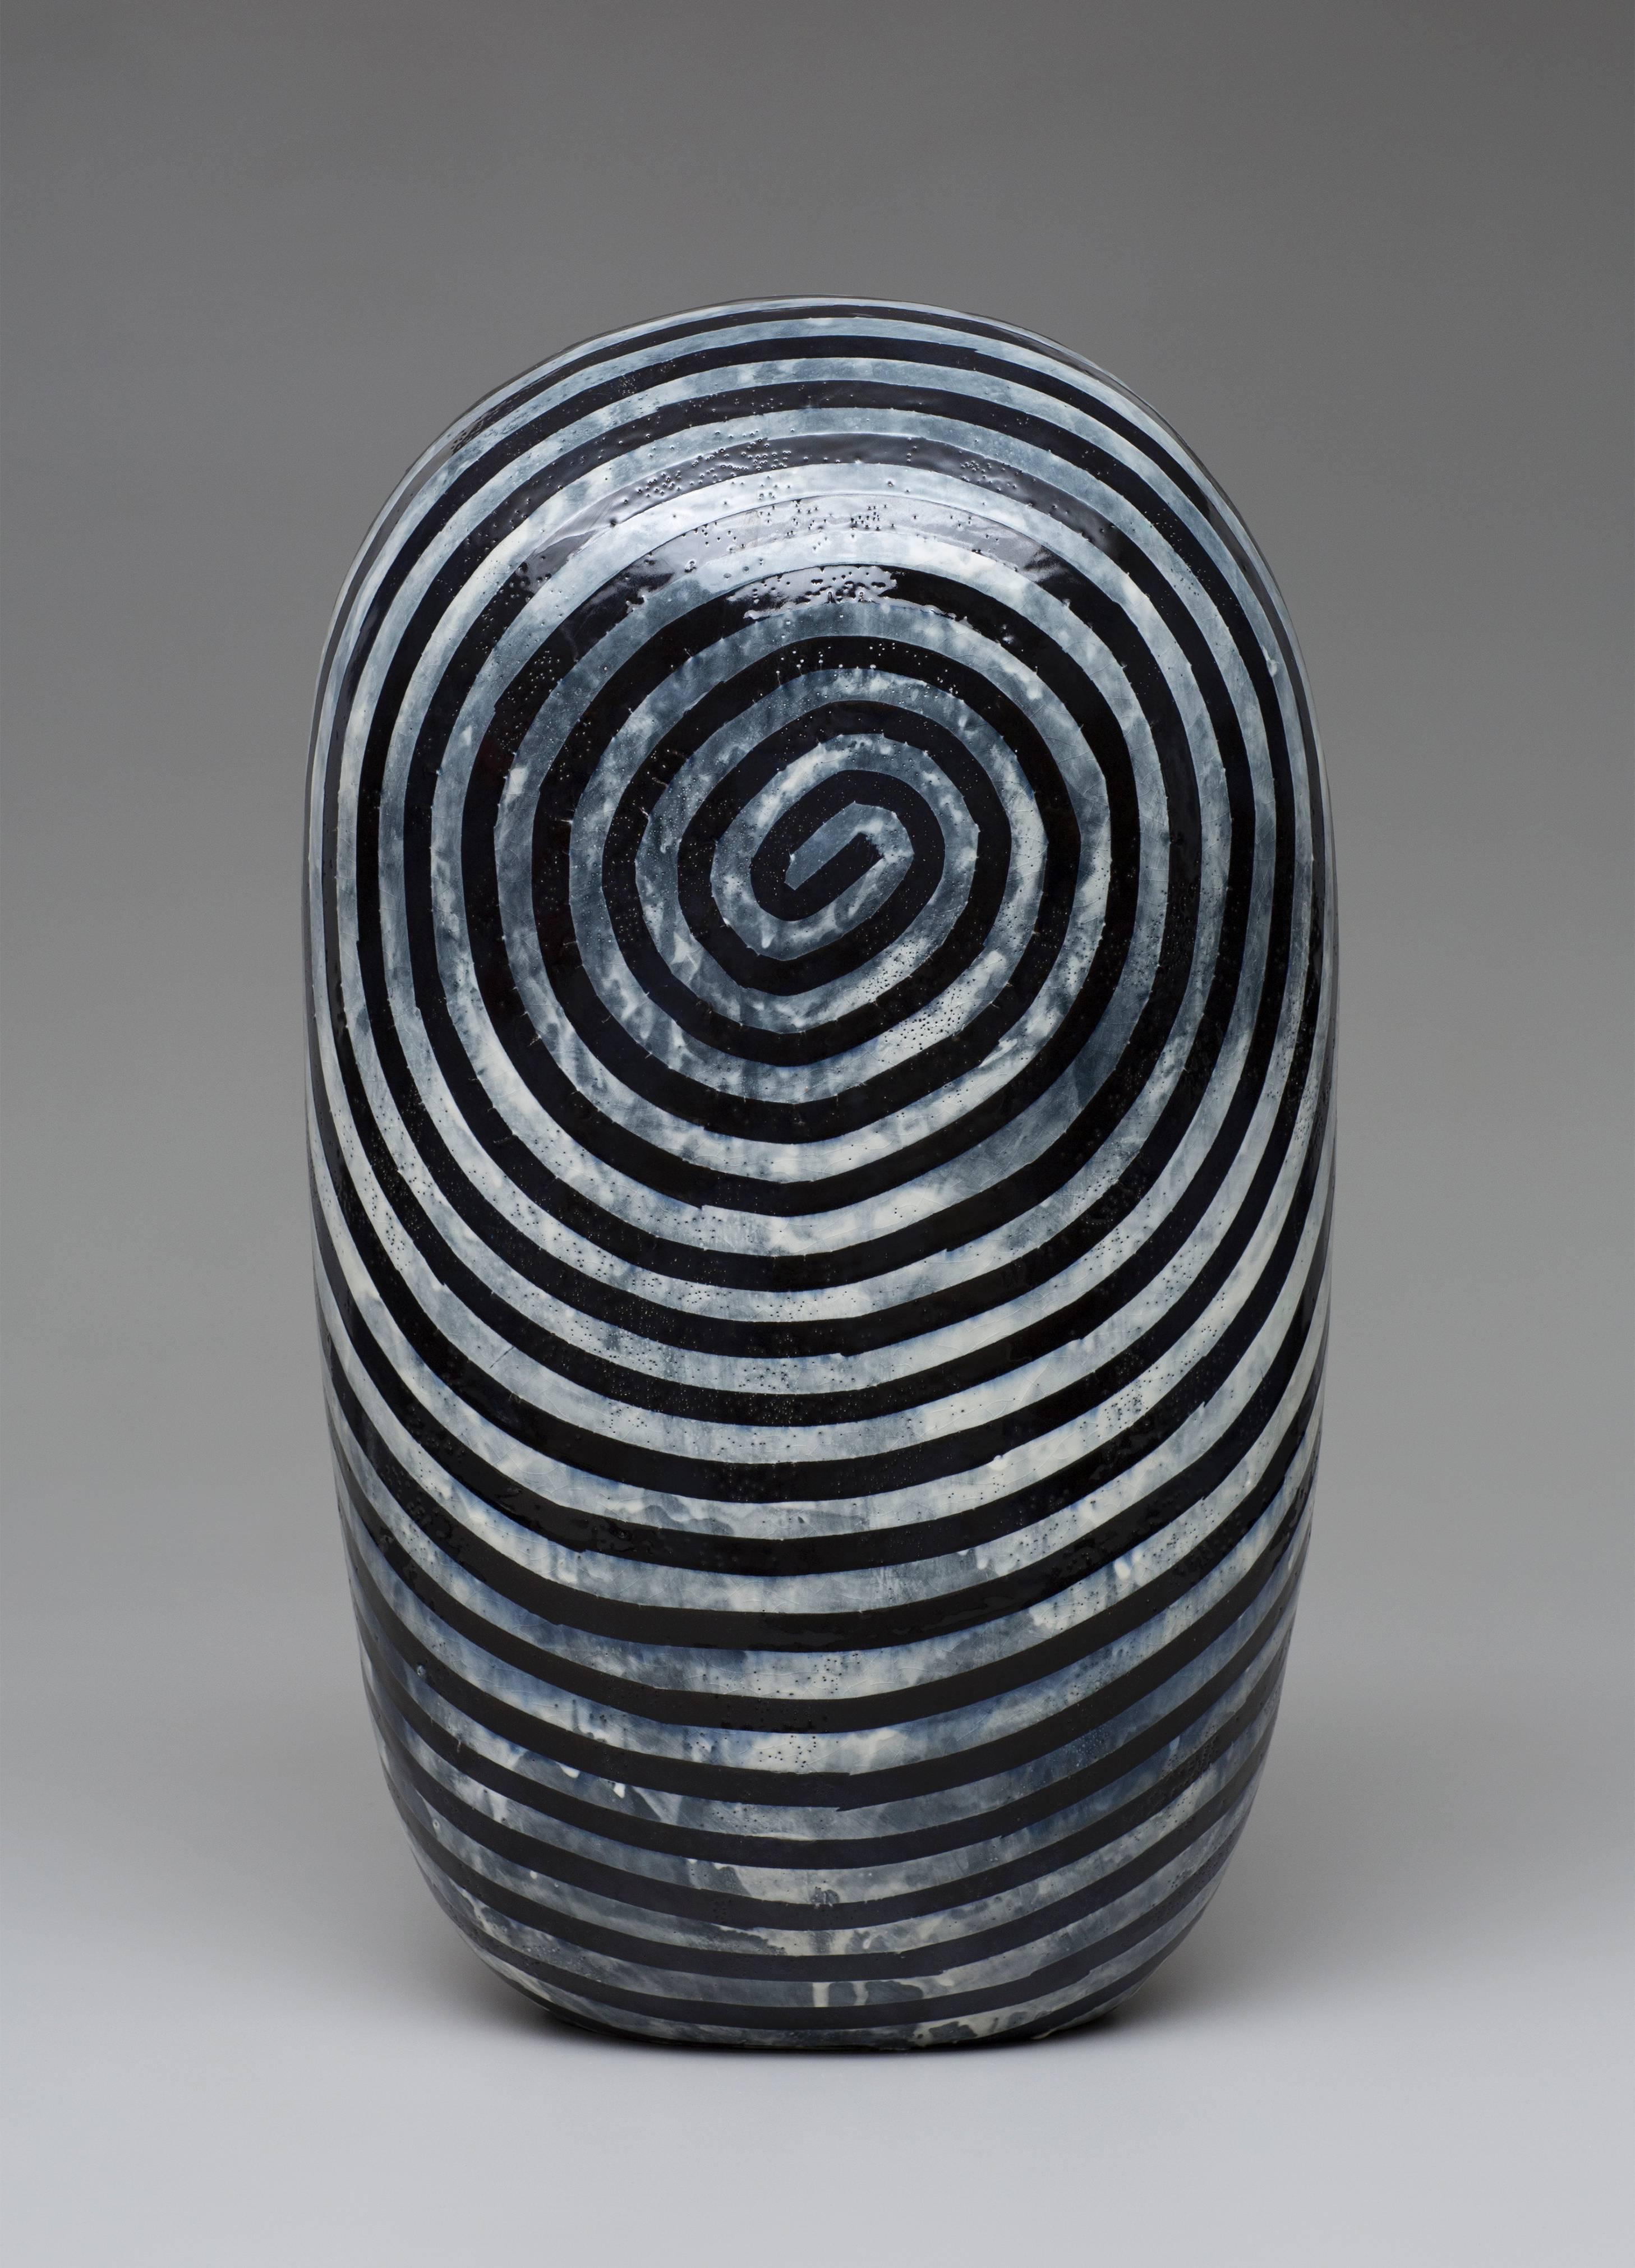 This wonderful piece by Jun Kaneko stands at 24.5" high.  Being on the smaller side of his Dango forms is advantageous for the collector wishing to acquire a piece of Kaneko's without needing a monumental space to display the work.  The patterning